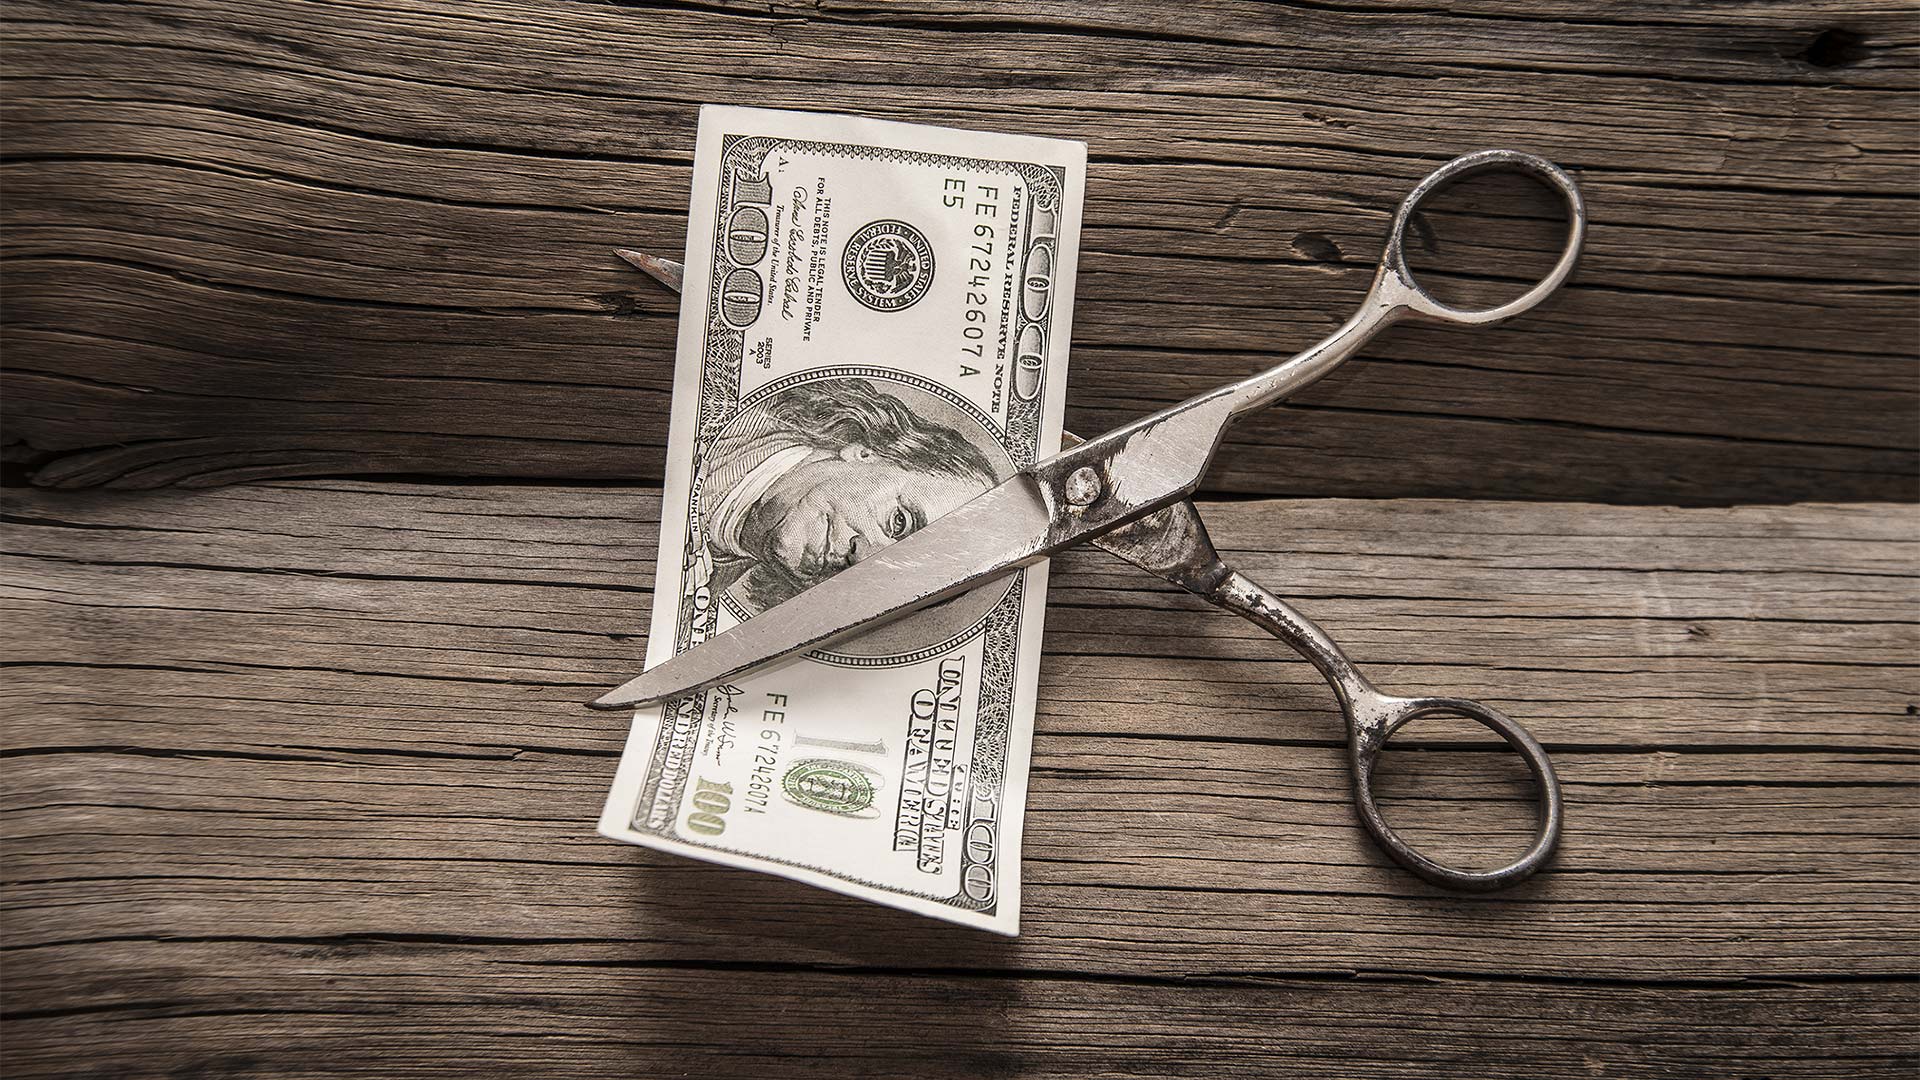 Scissors about to cut in half a one-hundred dollar note